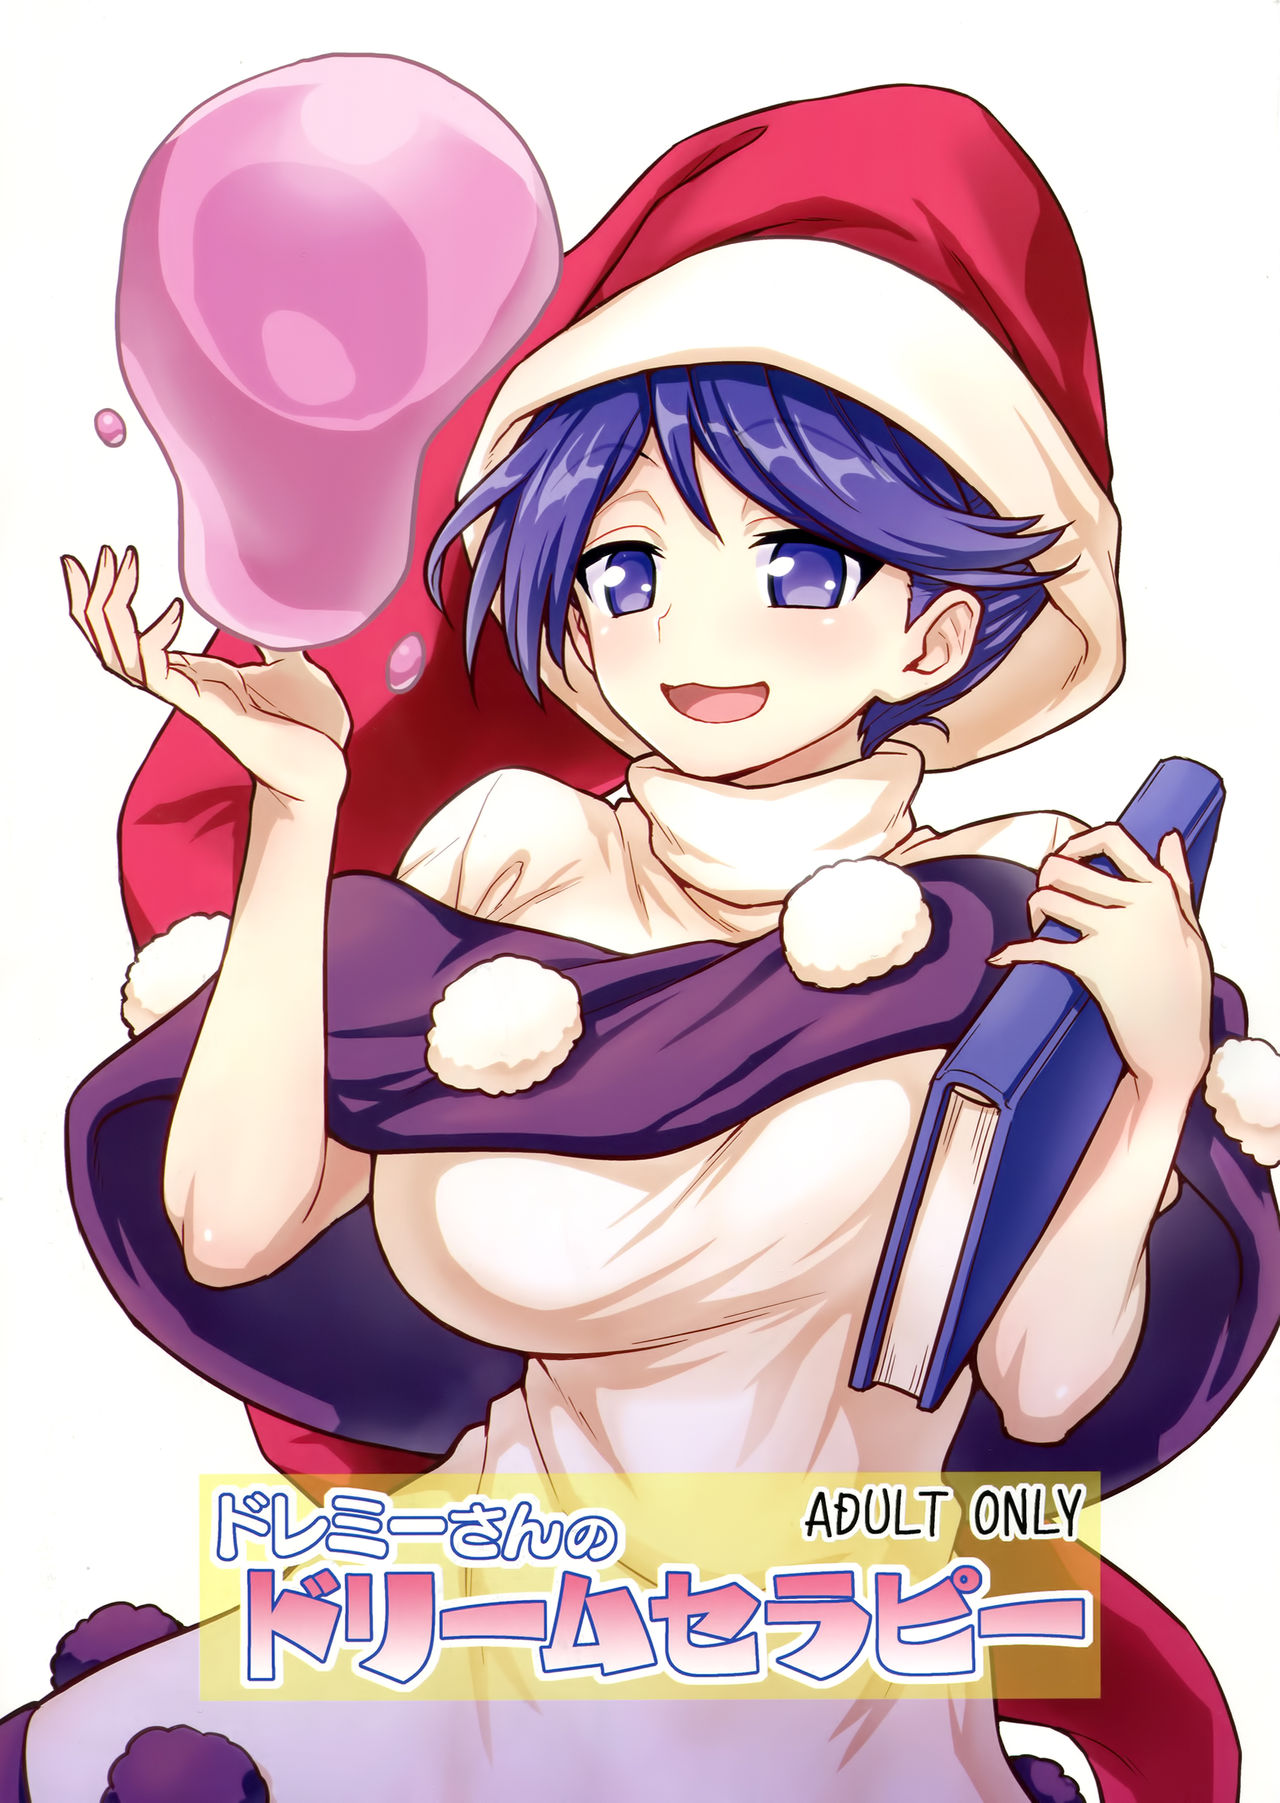 (C94) [110-GROOVE (Itou Yuuji)] Doremy-san no Dream Therapy (Touhou Project) [Chinese] [迷途竹林汉化] (C94) [110-GROOVE (イトウゆーじ)] ドレミーさんのドリームセラピー (東方Project) [中国翻訳]